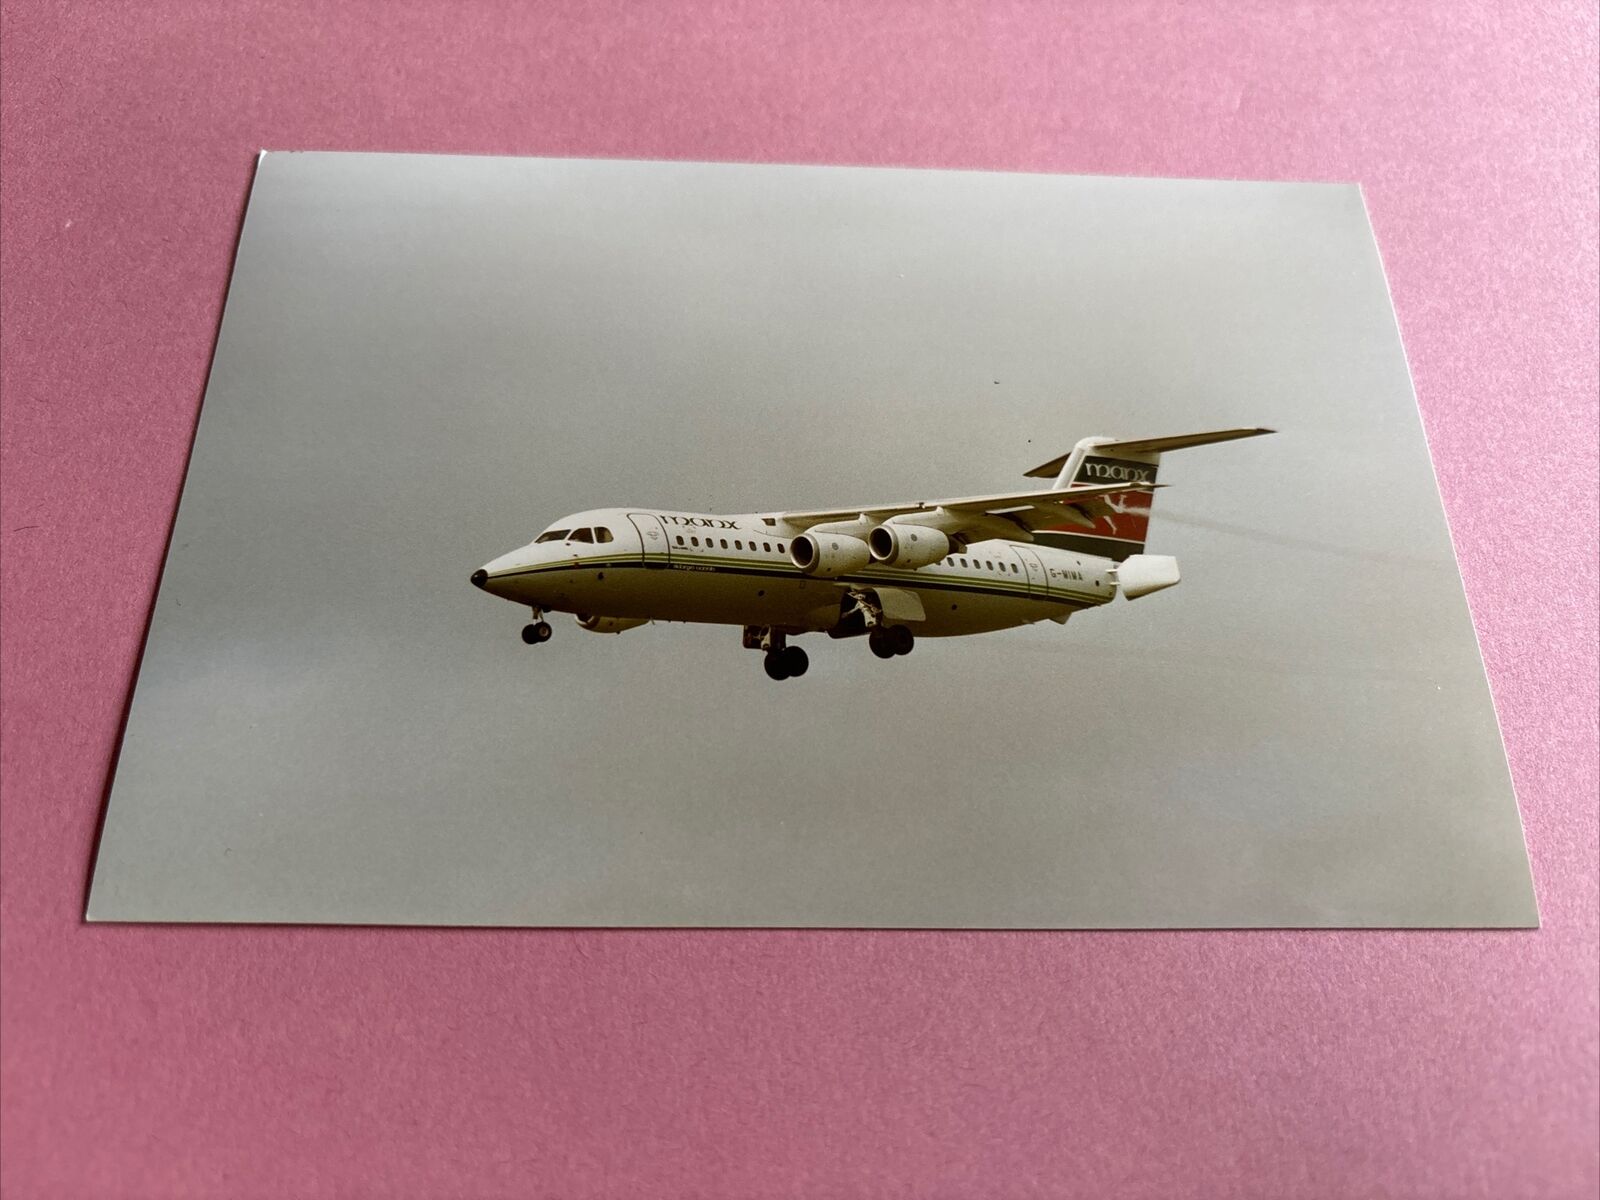 Manx Airlines BAe 146 G-MIMA colour photograph